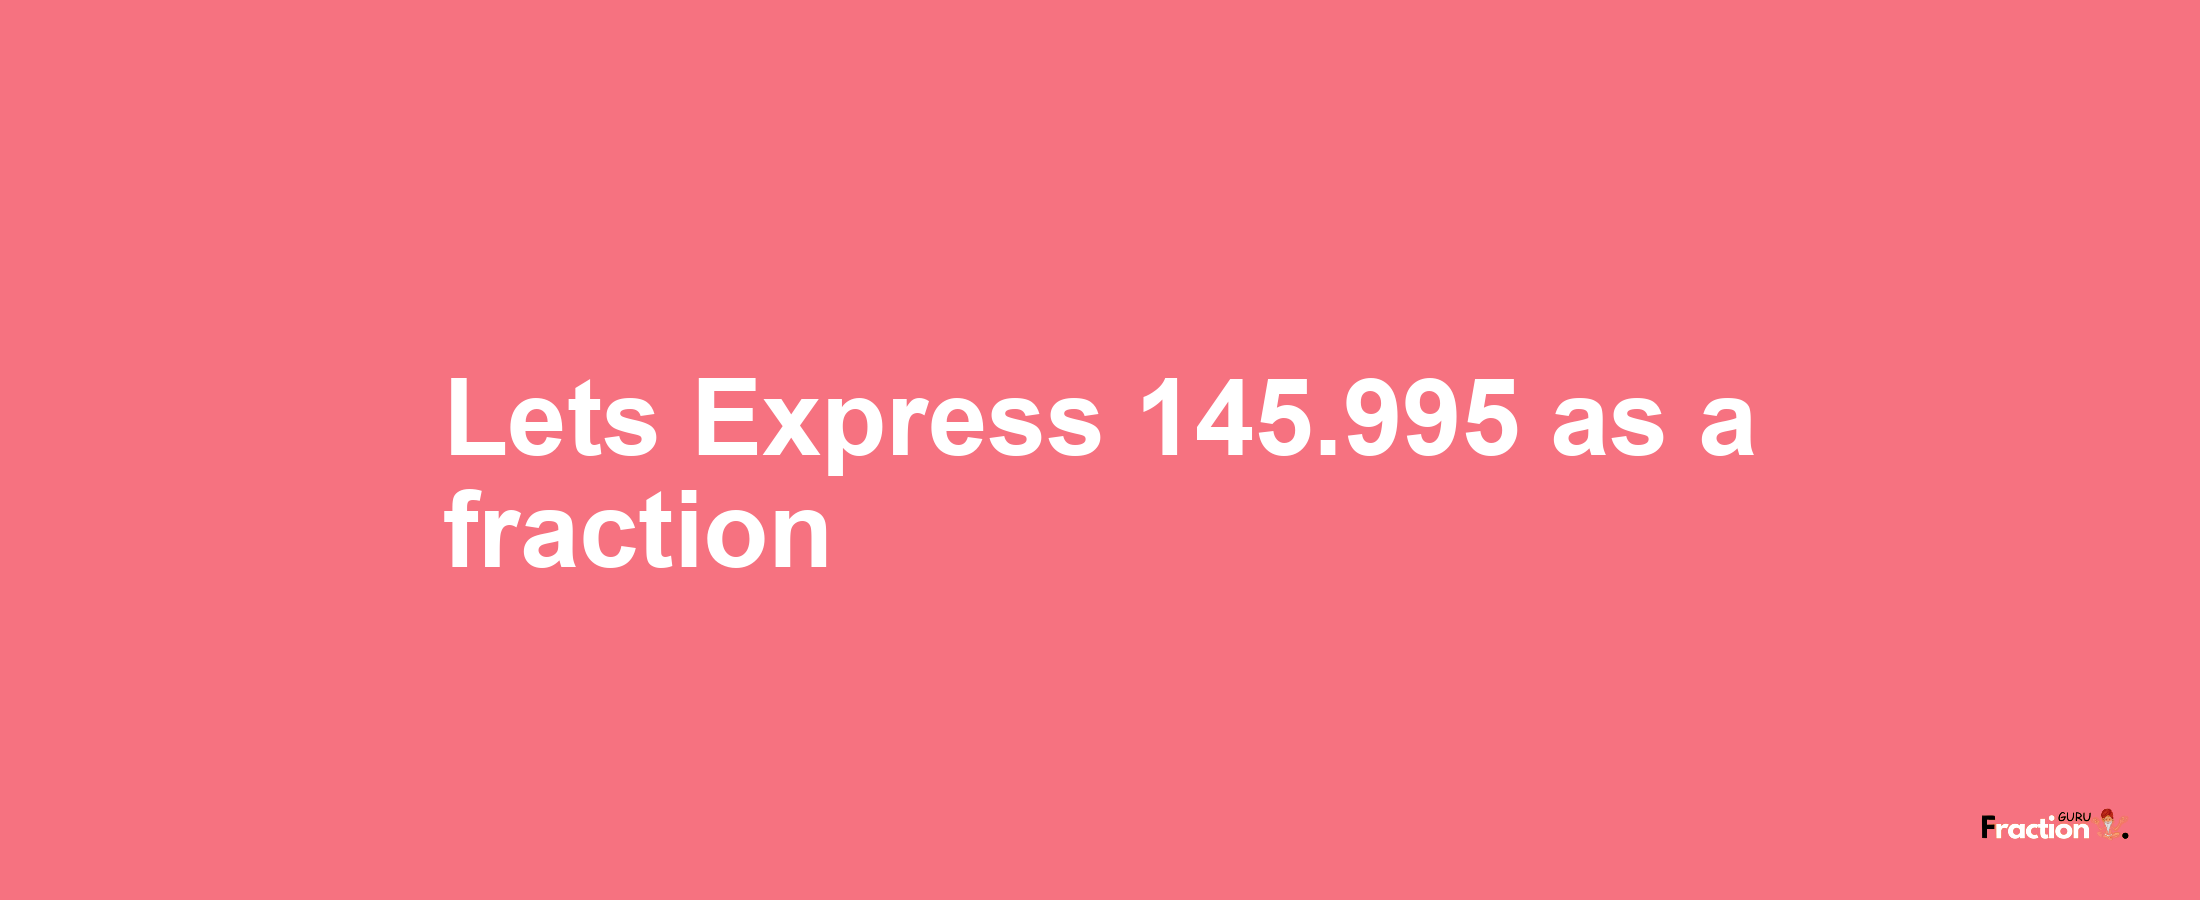 Lets Express 145.995 as afraction